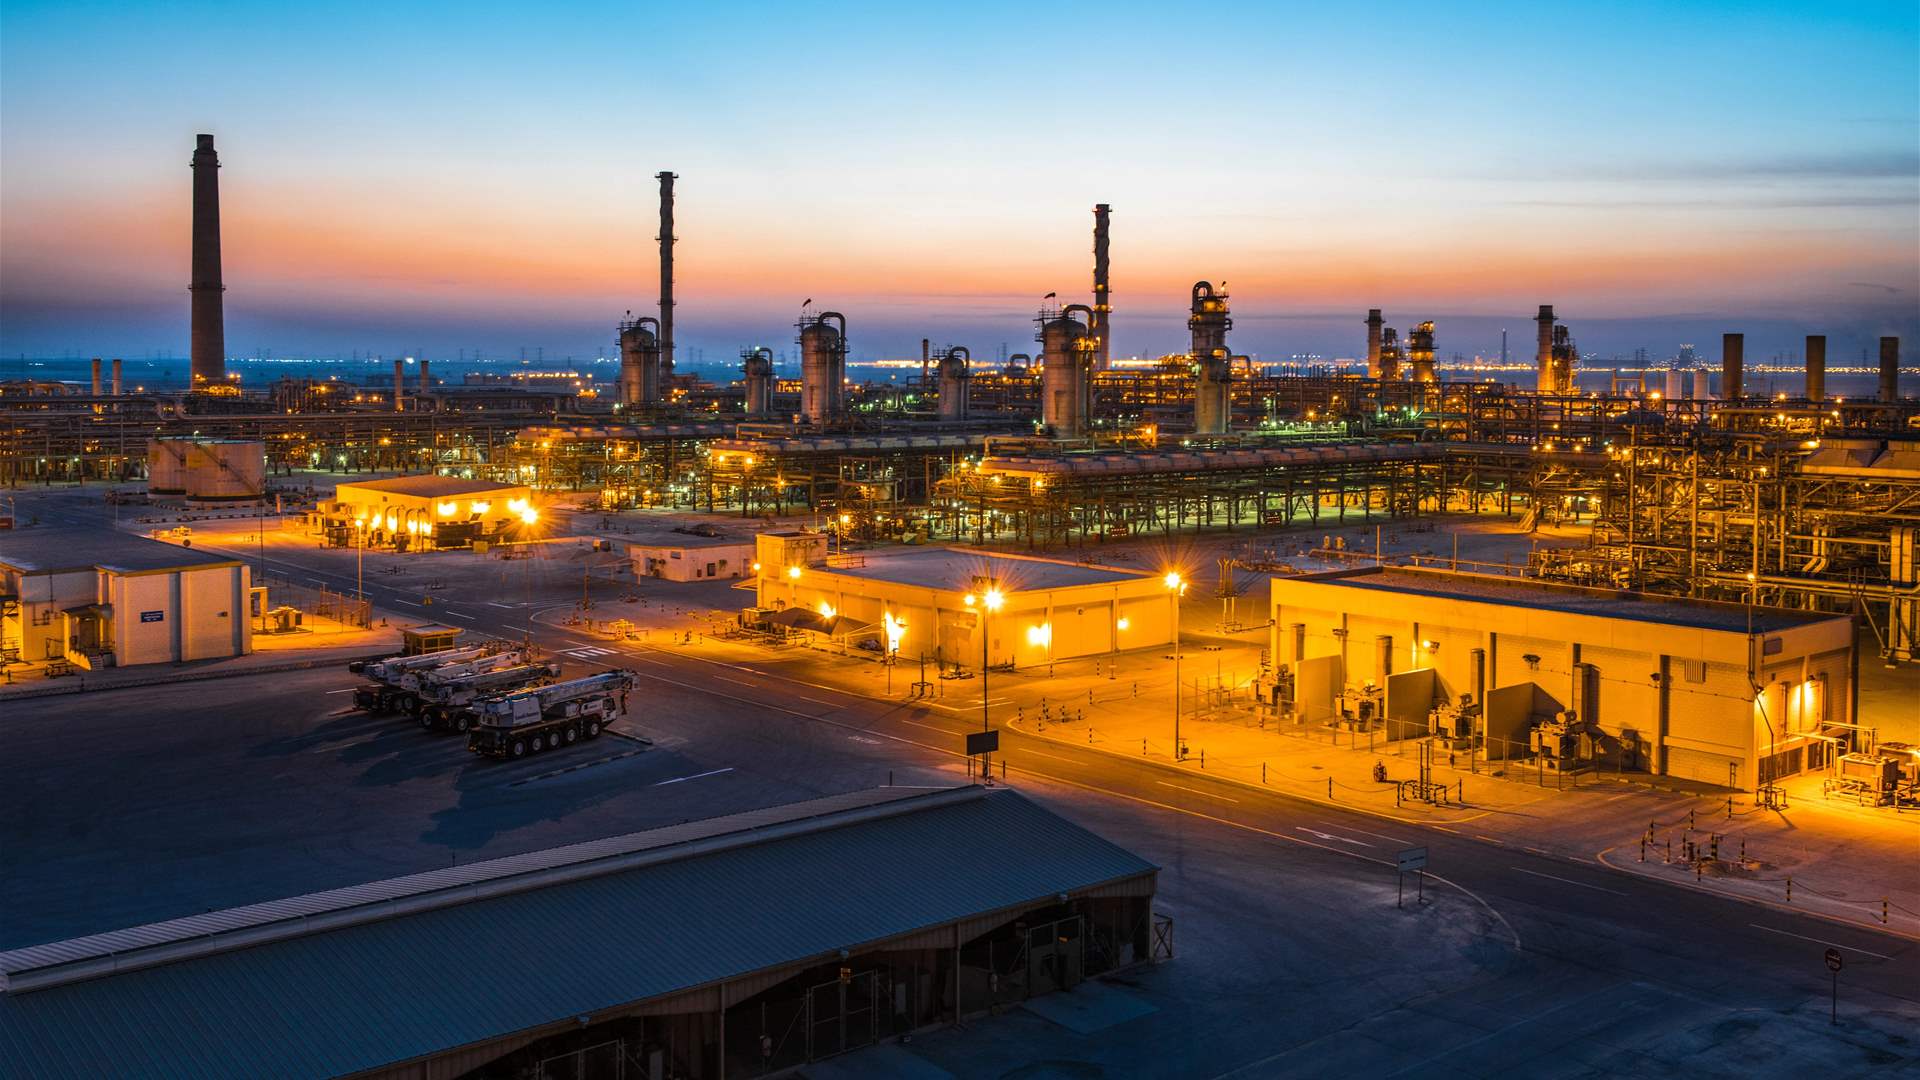 Another 15 trln standard cubic feet of gas proven at Saudi Aramco&#39;s Jafurah field